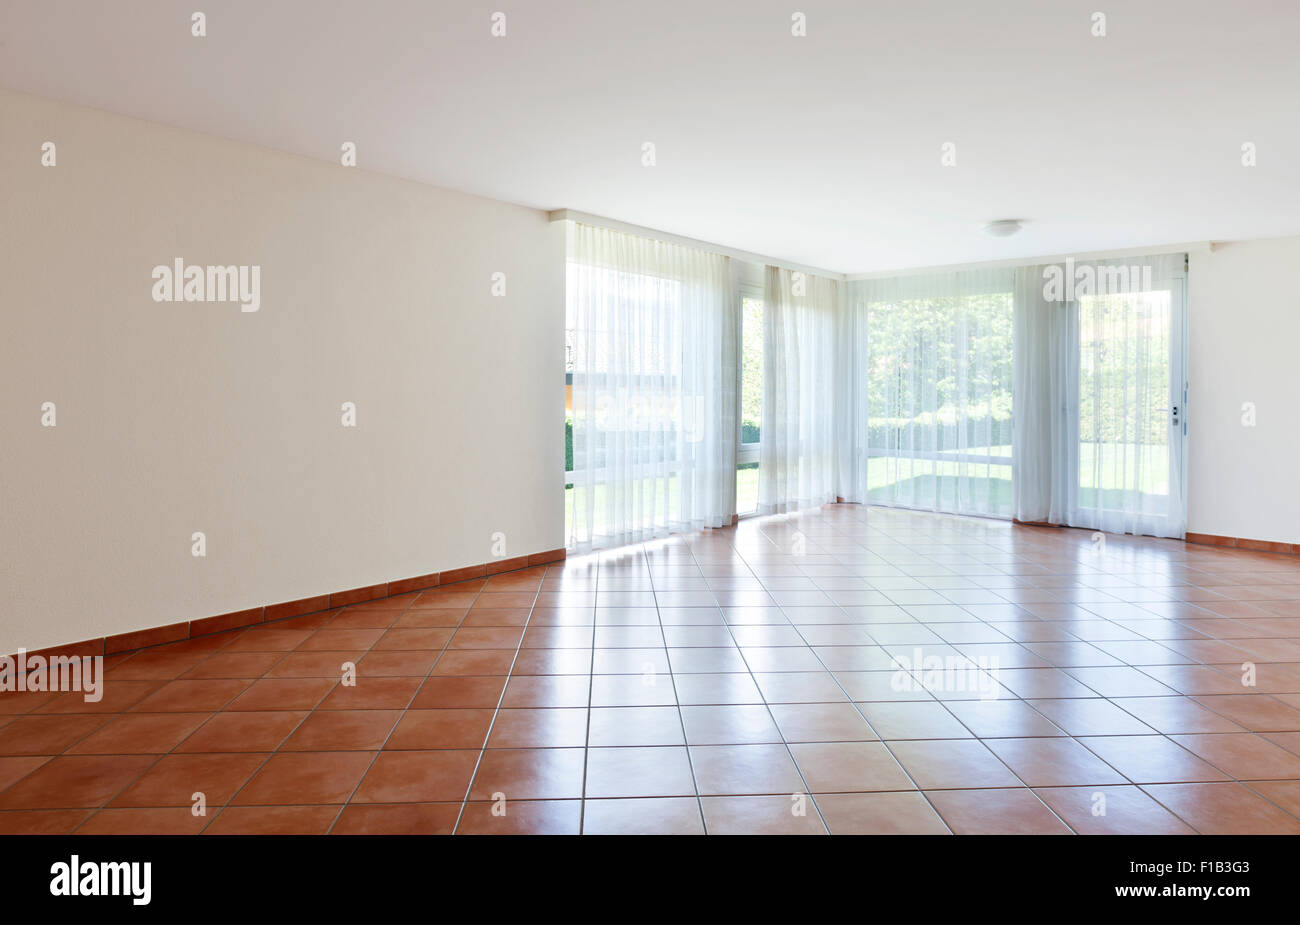 room with terracotta floor,windows with white curtains Stock Photo